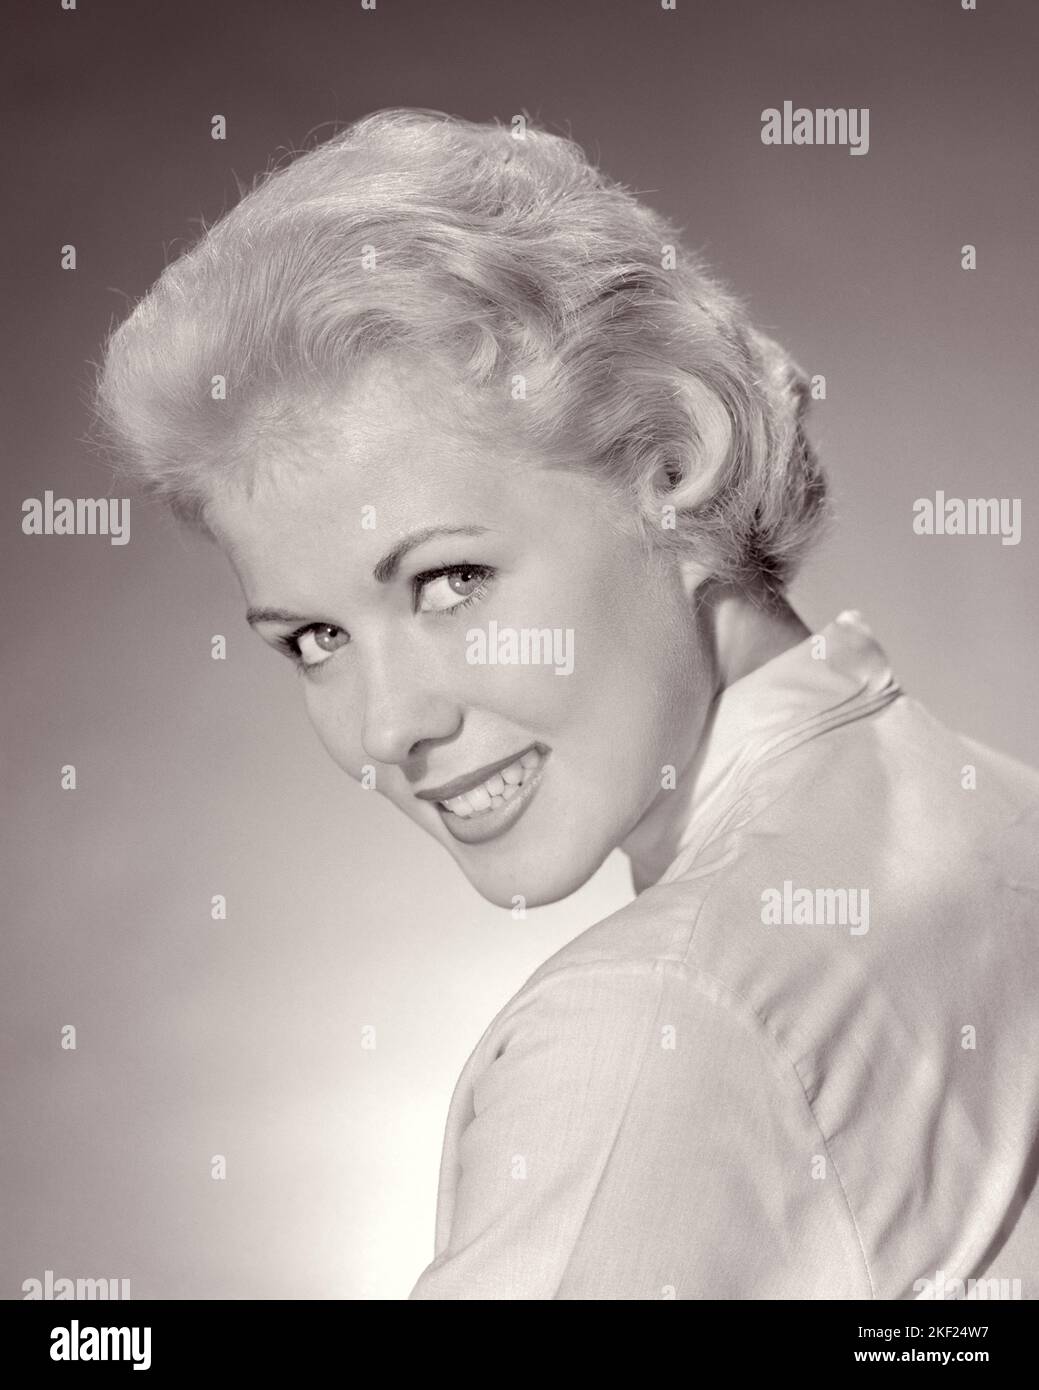 1950s PORTRAIT PRETTY TEEN GIRL SMILING WITH SHORT BLONDE HAIR LOOKING AT CAMERA OVER HER SHOULDER - g224 HAR001 HARS CONFIDENCE B&W EYE CONTACT PRETTY HAPPINESS HEAD AND SHOULDERS CHEERFUL JOYFUL STYLISH TEENAGED YOUNG ADULT WOMAN BLACK AND WHITE CAUCASIAN ETHNICITY HAR001 OLD FASHIONED Stock Photo